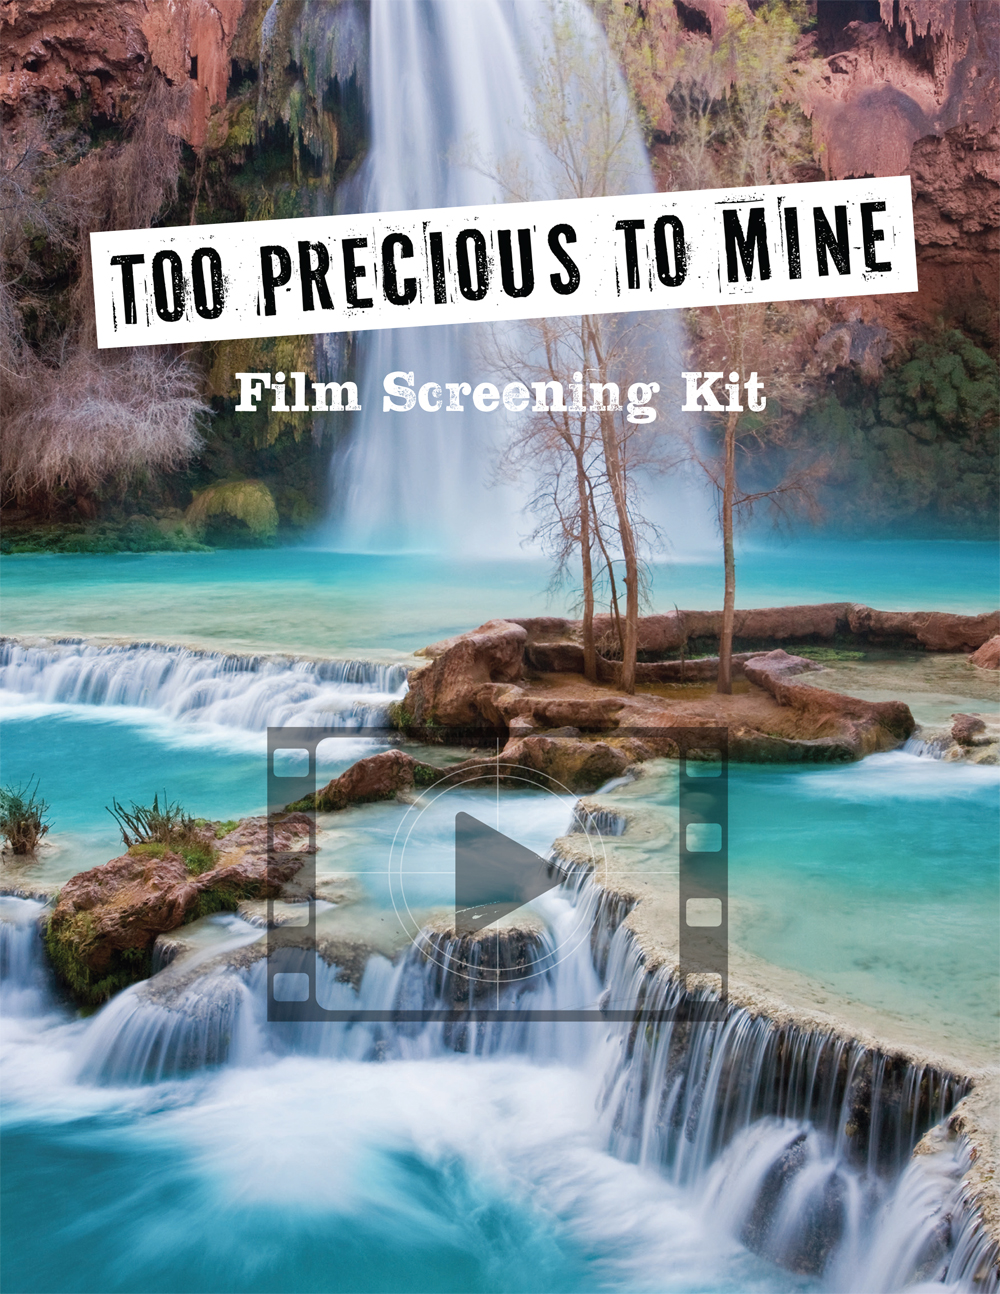 Download the Too Precious to Mine Film Screening Kit